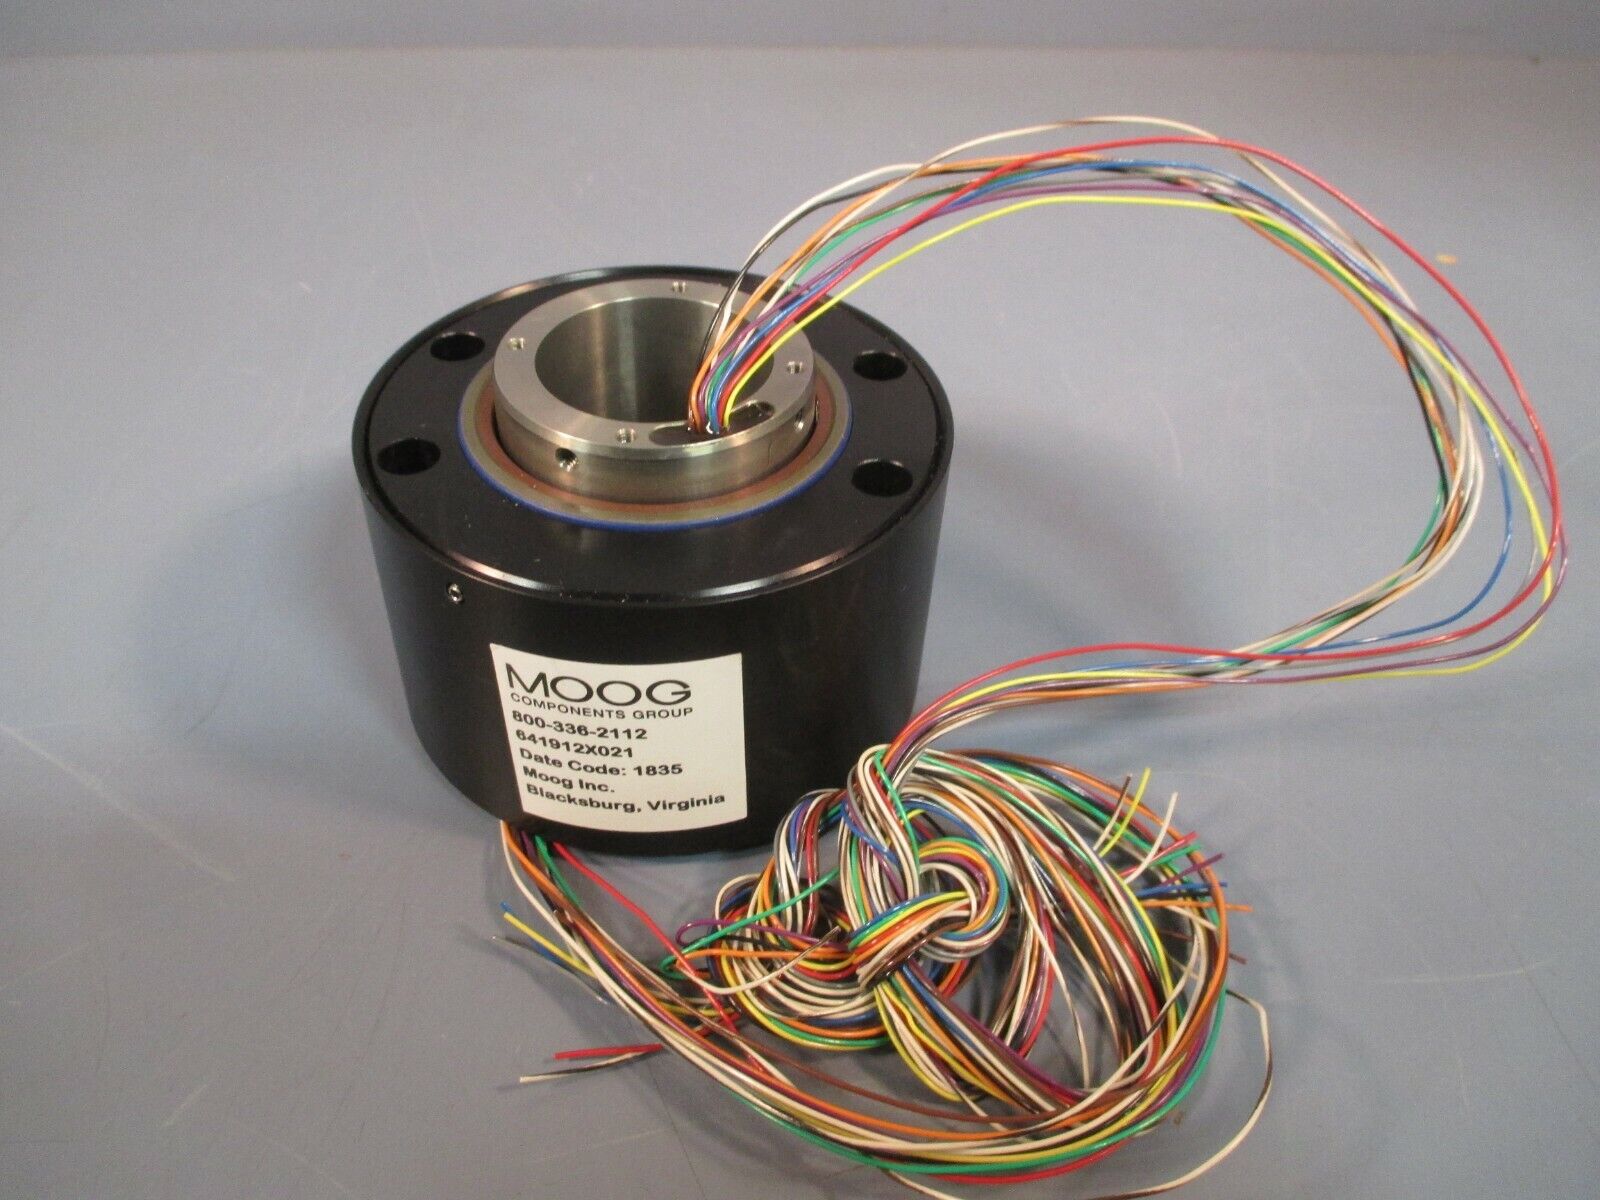 MOOG COMPONENTS SLIP RING COIL Assembly 641912X021 8003362112